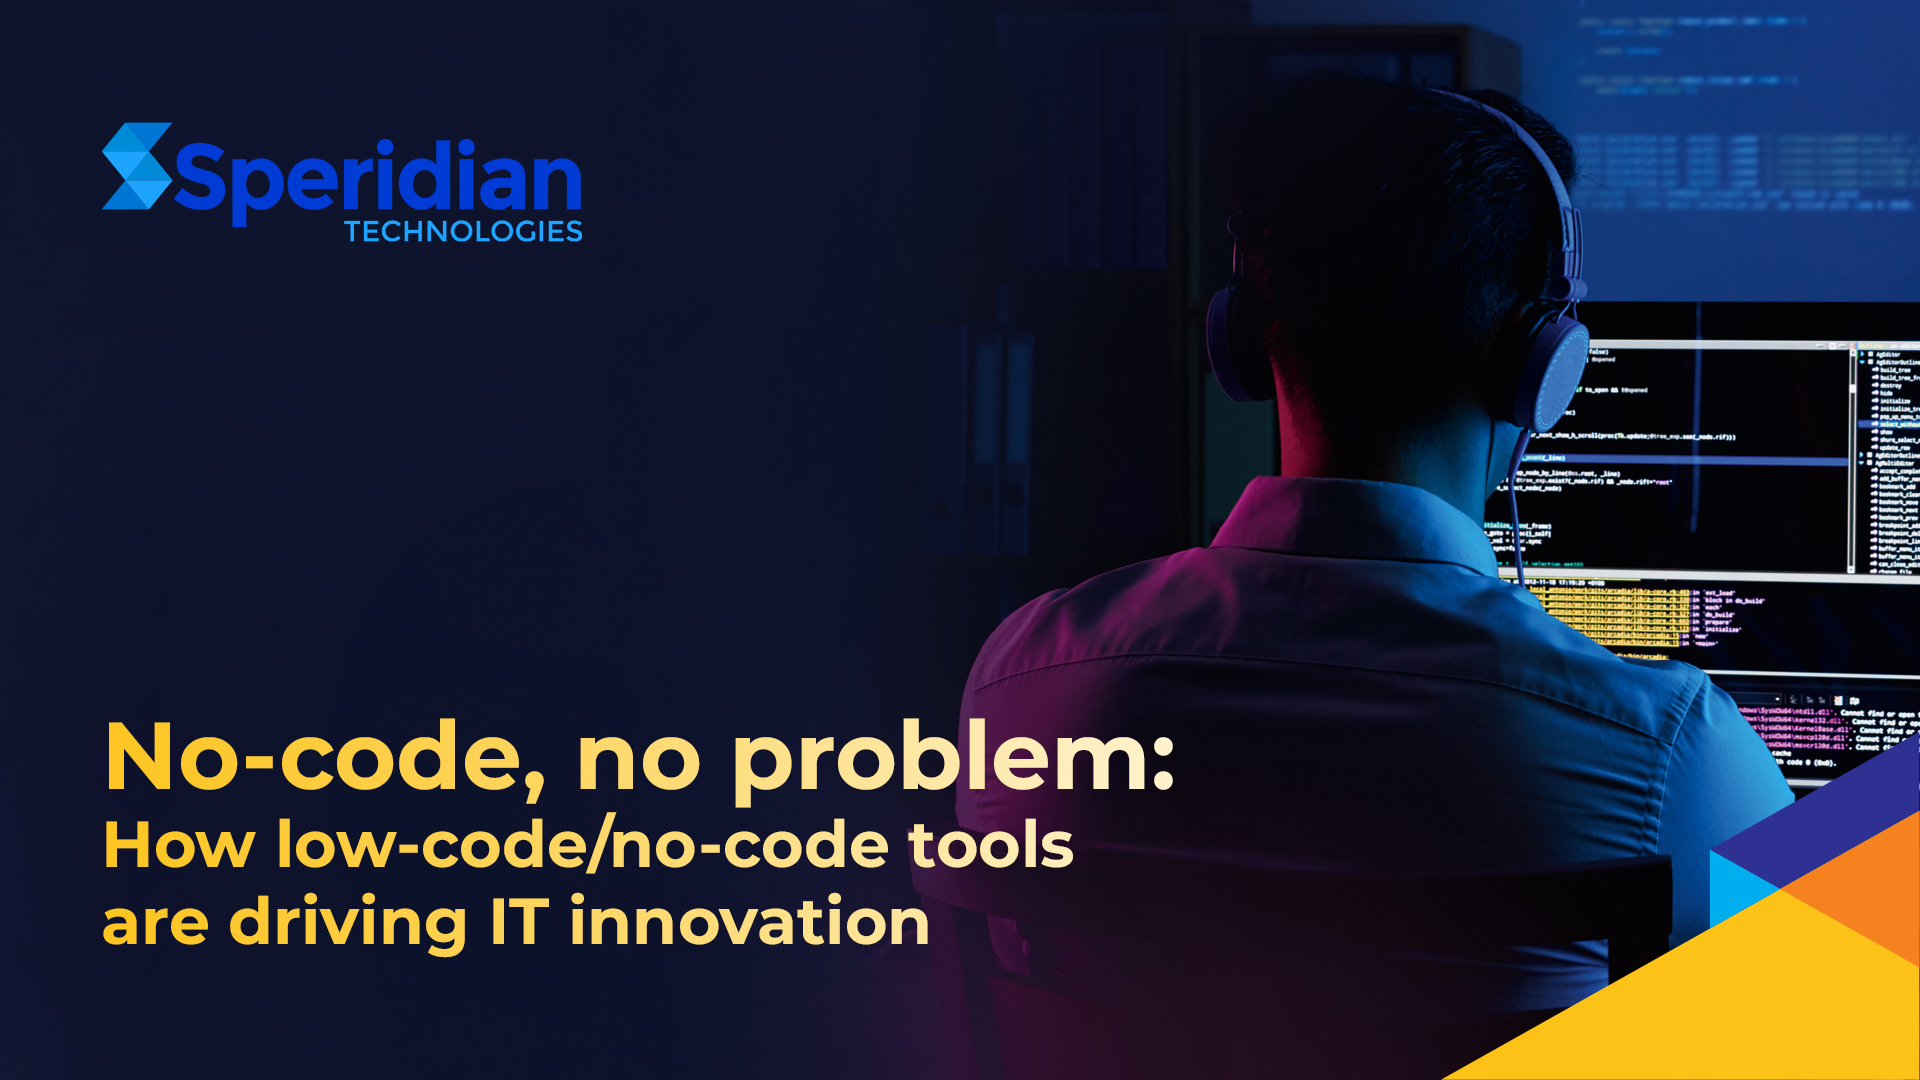 No-code, no problem: How low-code/no-code tools are driving IT innovation